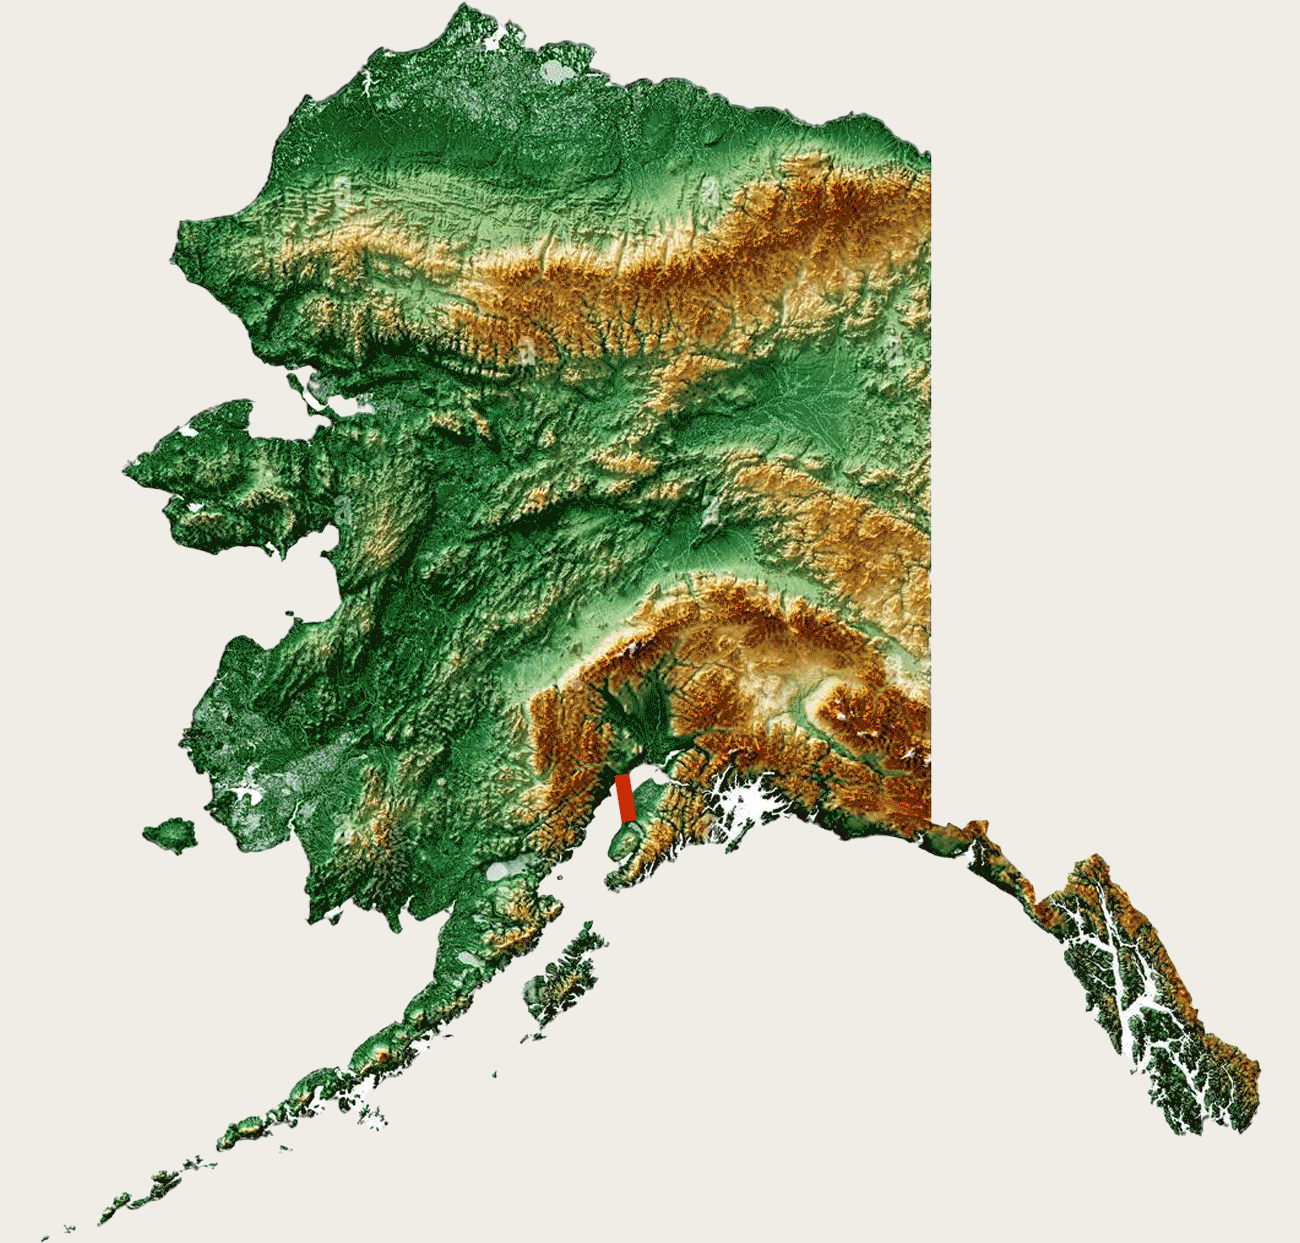 #Alaska, #FlightRoutes, #Travel, #Aviation, #Map, #Topography, #AirTravel, #Transportation, #Geography, #AirService